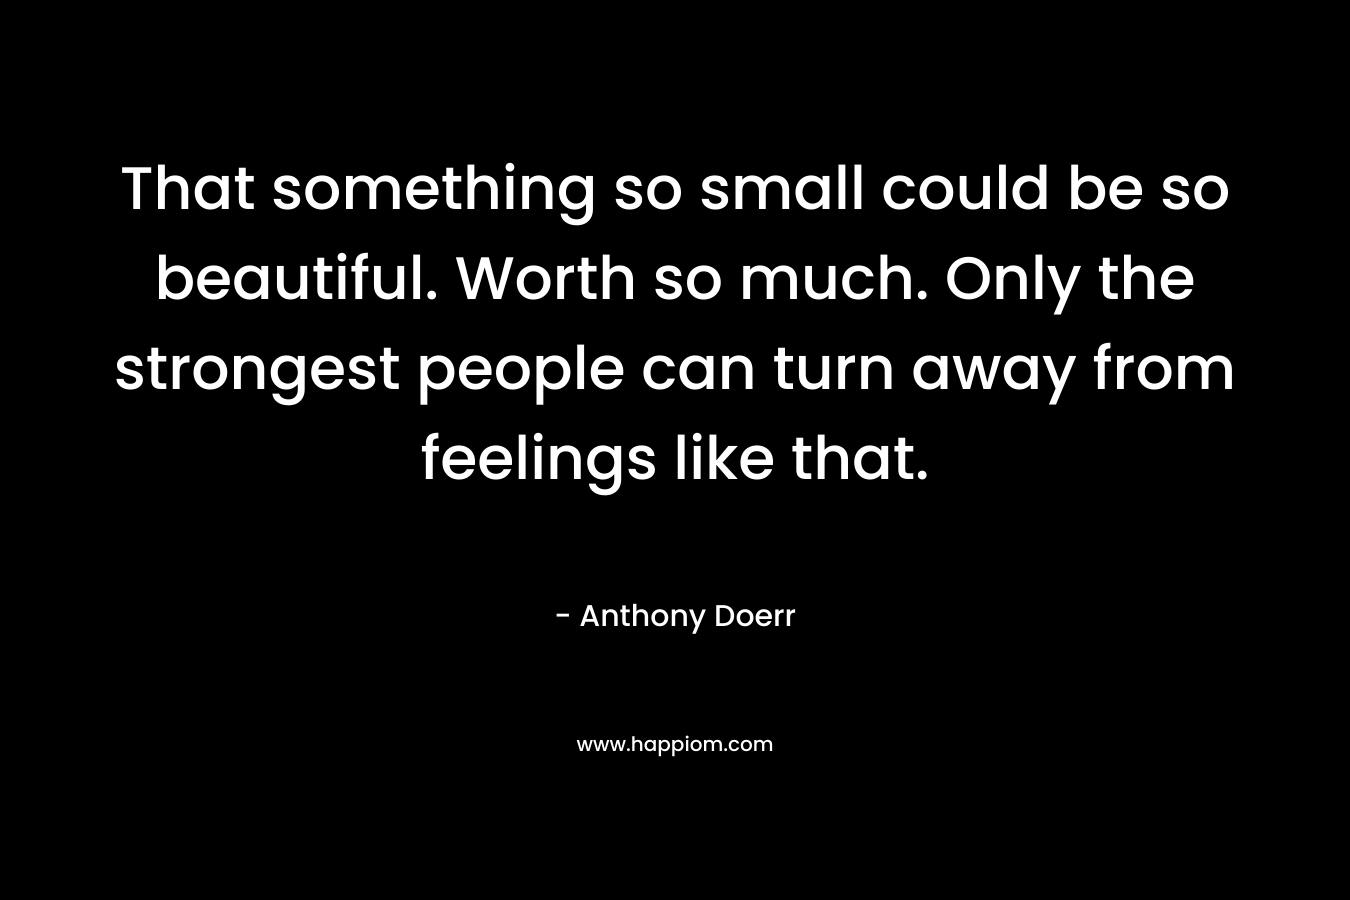 That something so small could be so beautiful. Worth so much. Only the strongest people can turn away from feelings like that. – Anthony Doerr